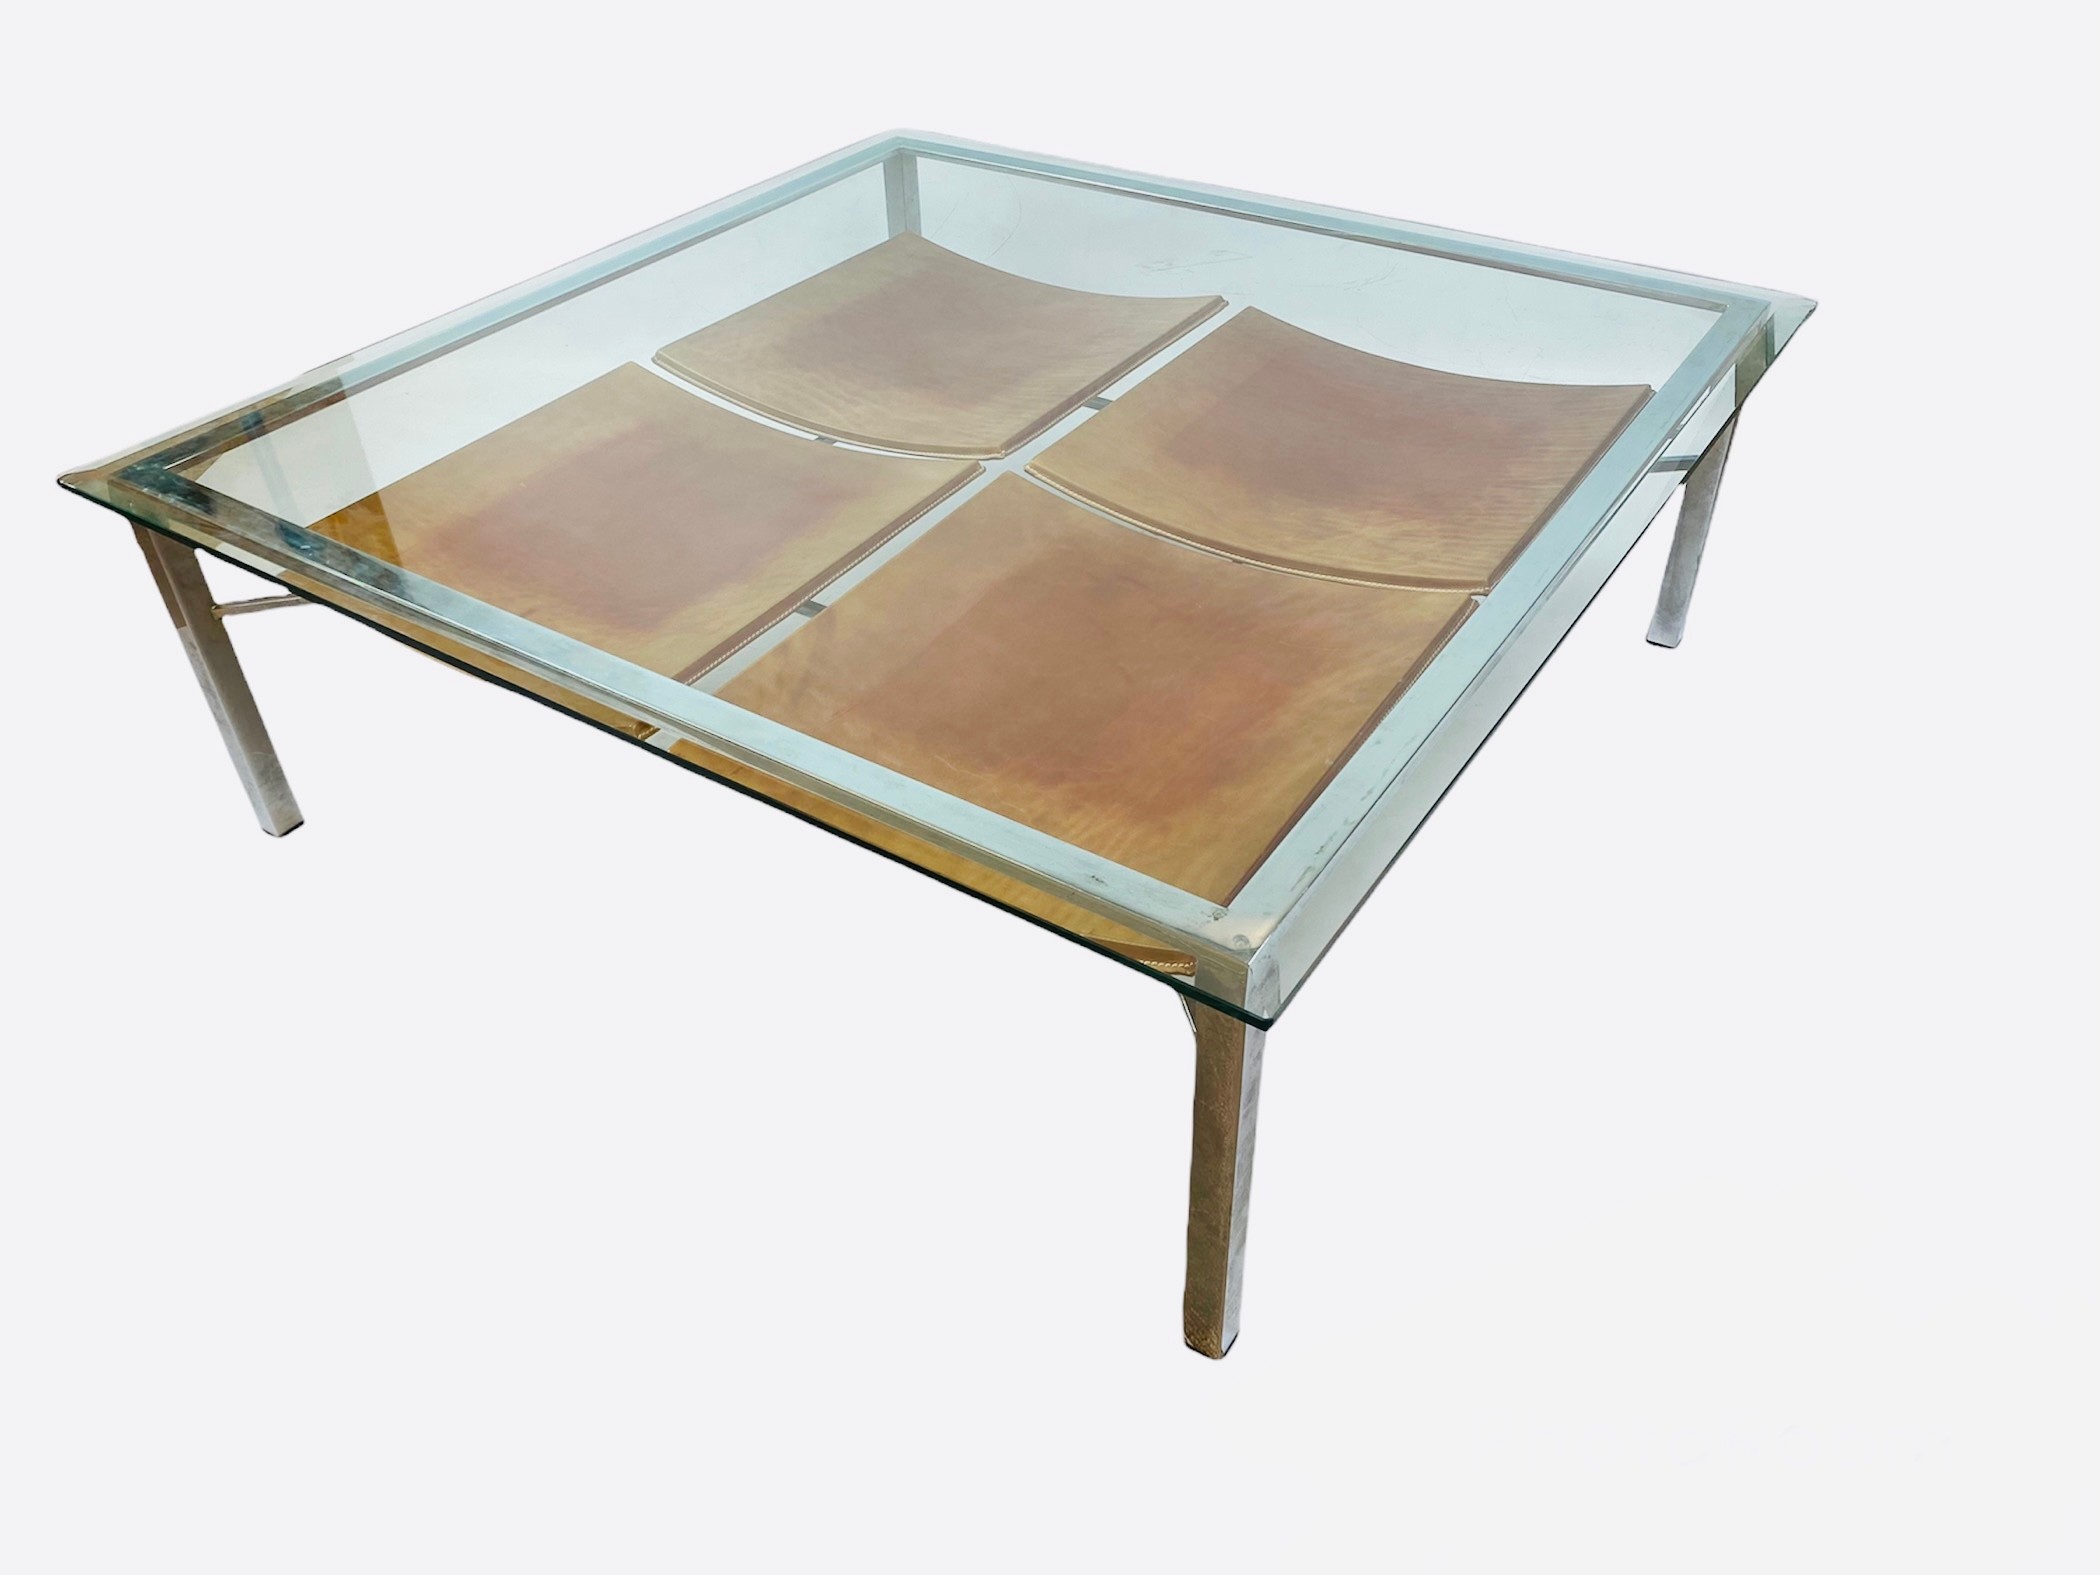 LOW TABLE, 36cm H x 106cm x 106cm, 1970's, square bevelled glass top on a chrome base, with a - Image 6 of 7